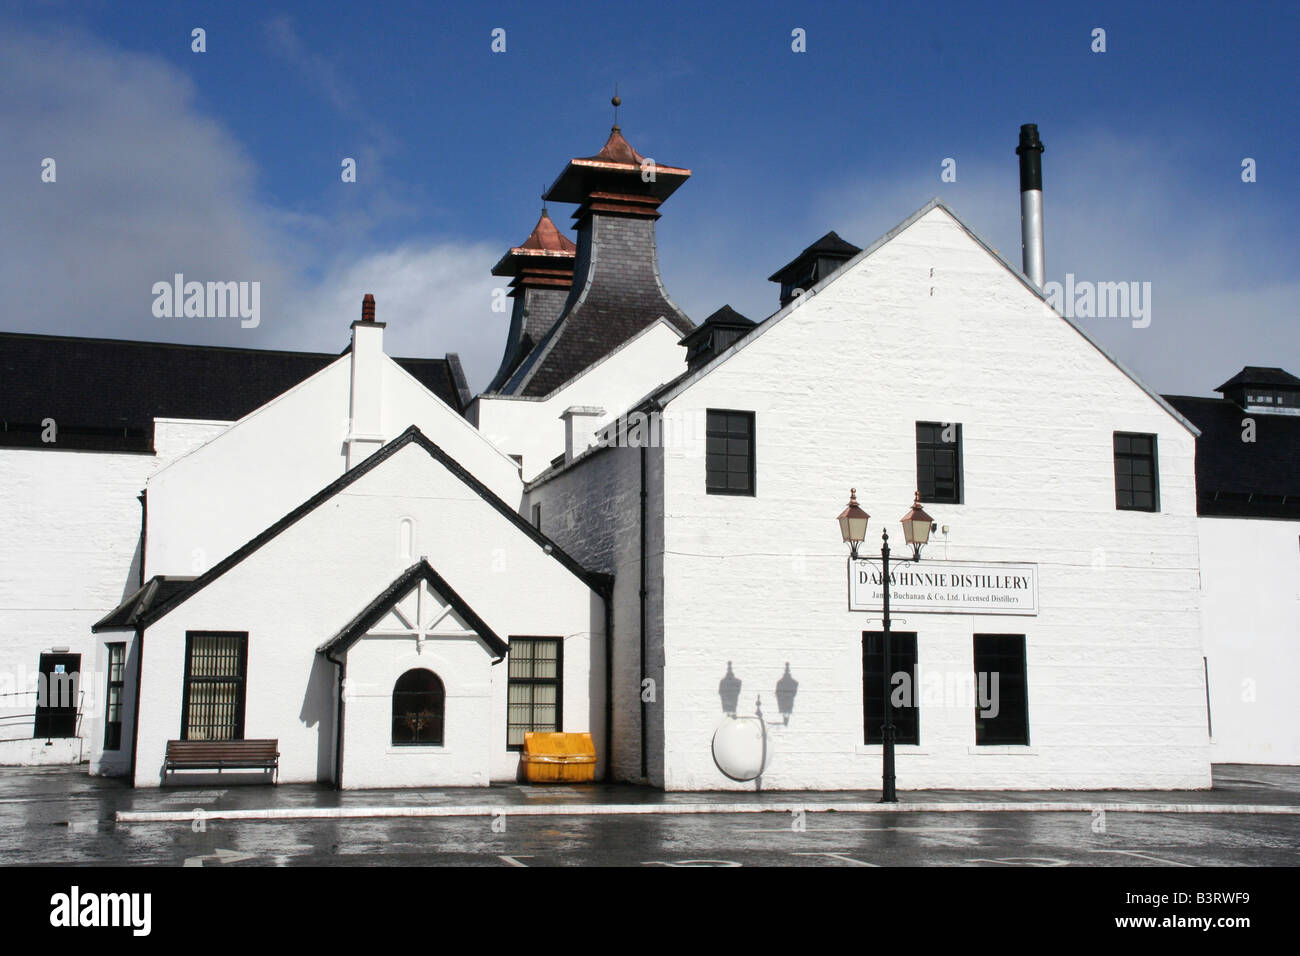 dalwhinnie visitor centre scotch whisky distillery Inverness-shire scotland uk gb Stock Photo